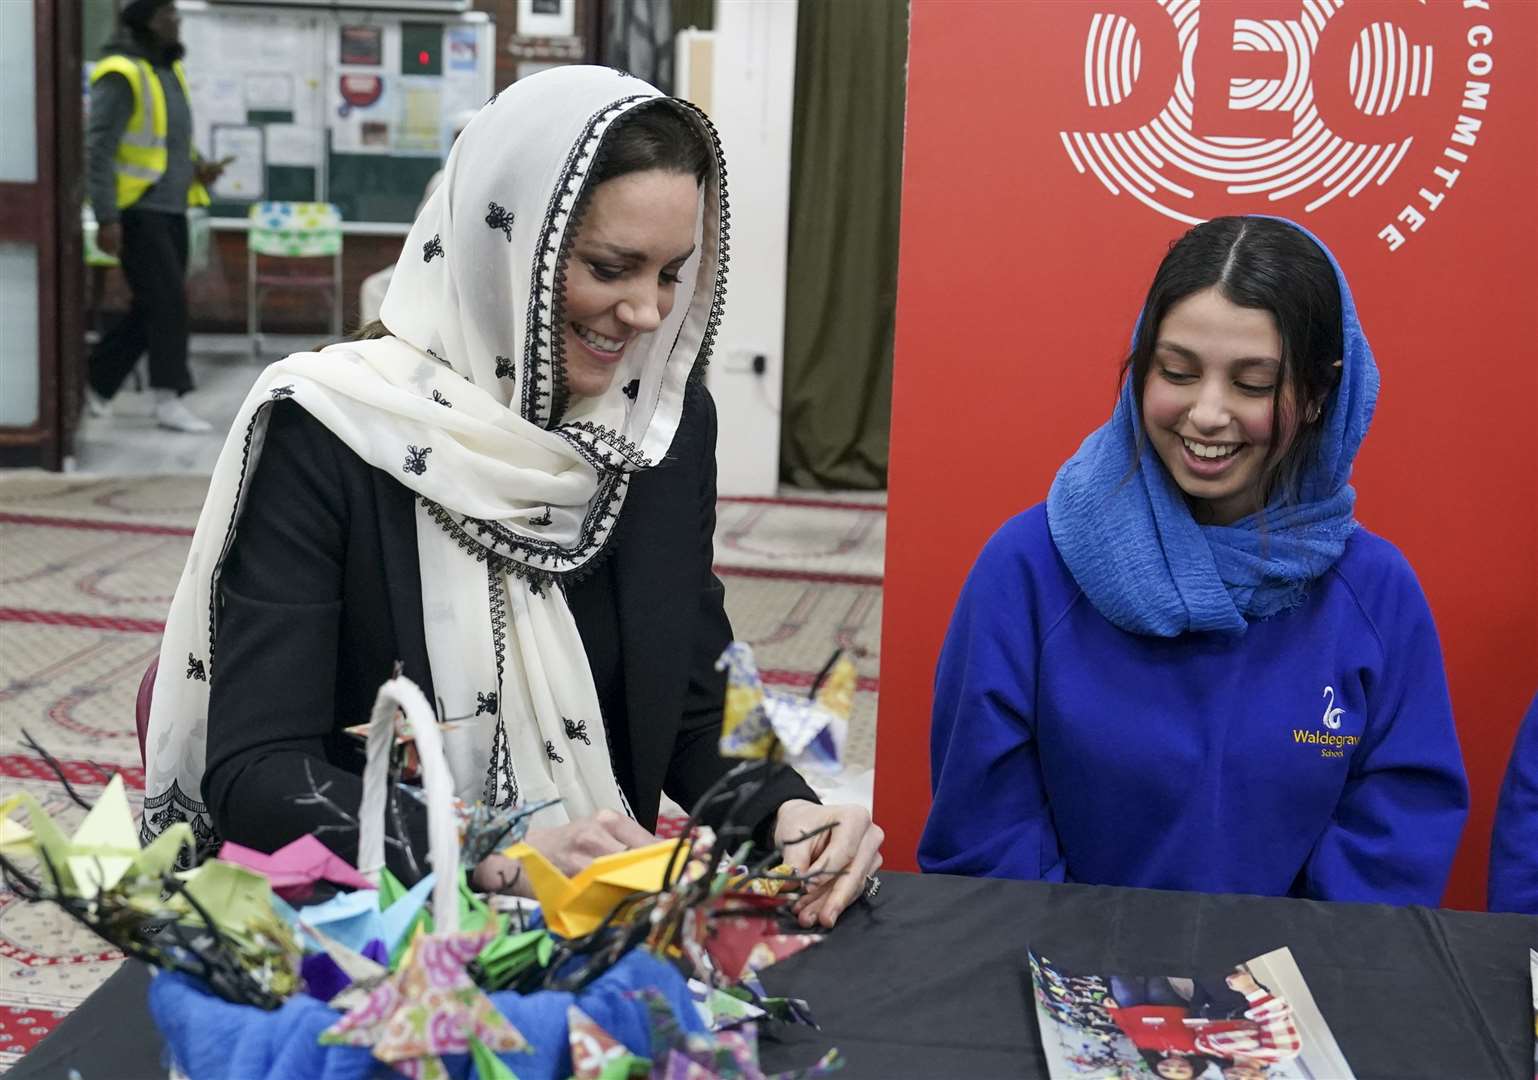 The Princess of Wales makes an origami crane with Dila Kaya at the Hayes Muslim Centre (Arthur Edwards/The Sun/PA)